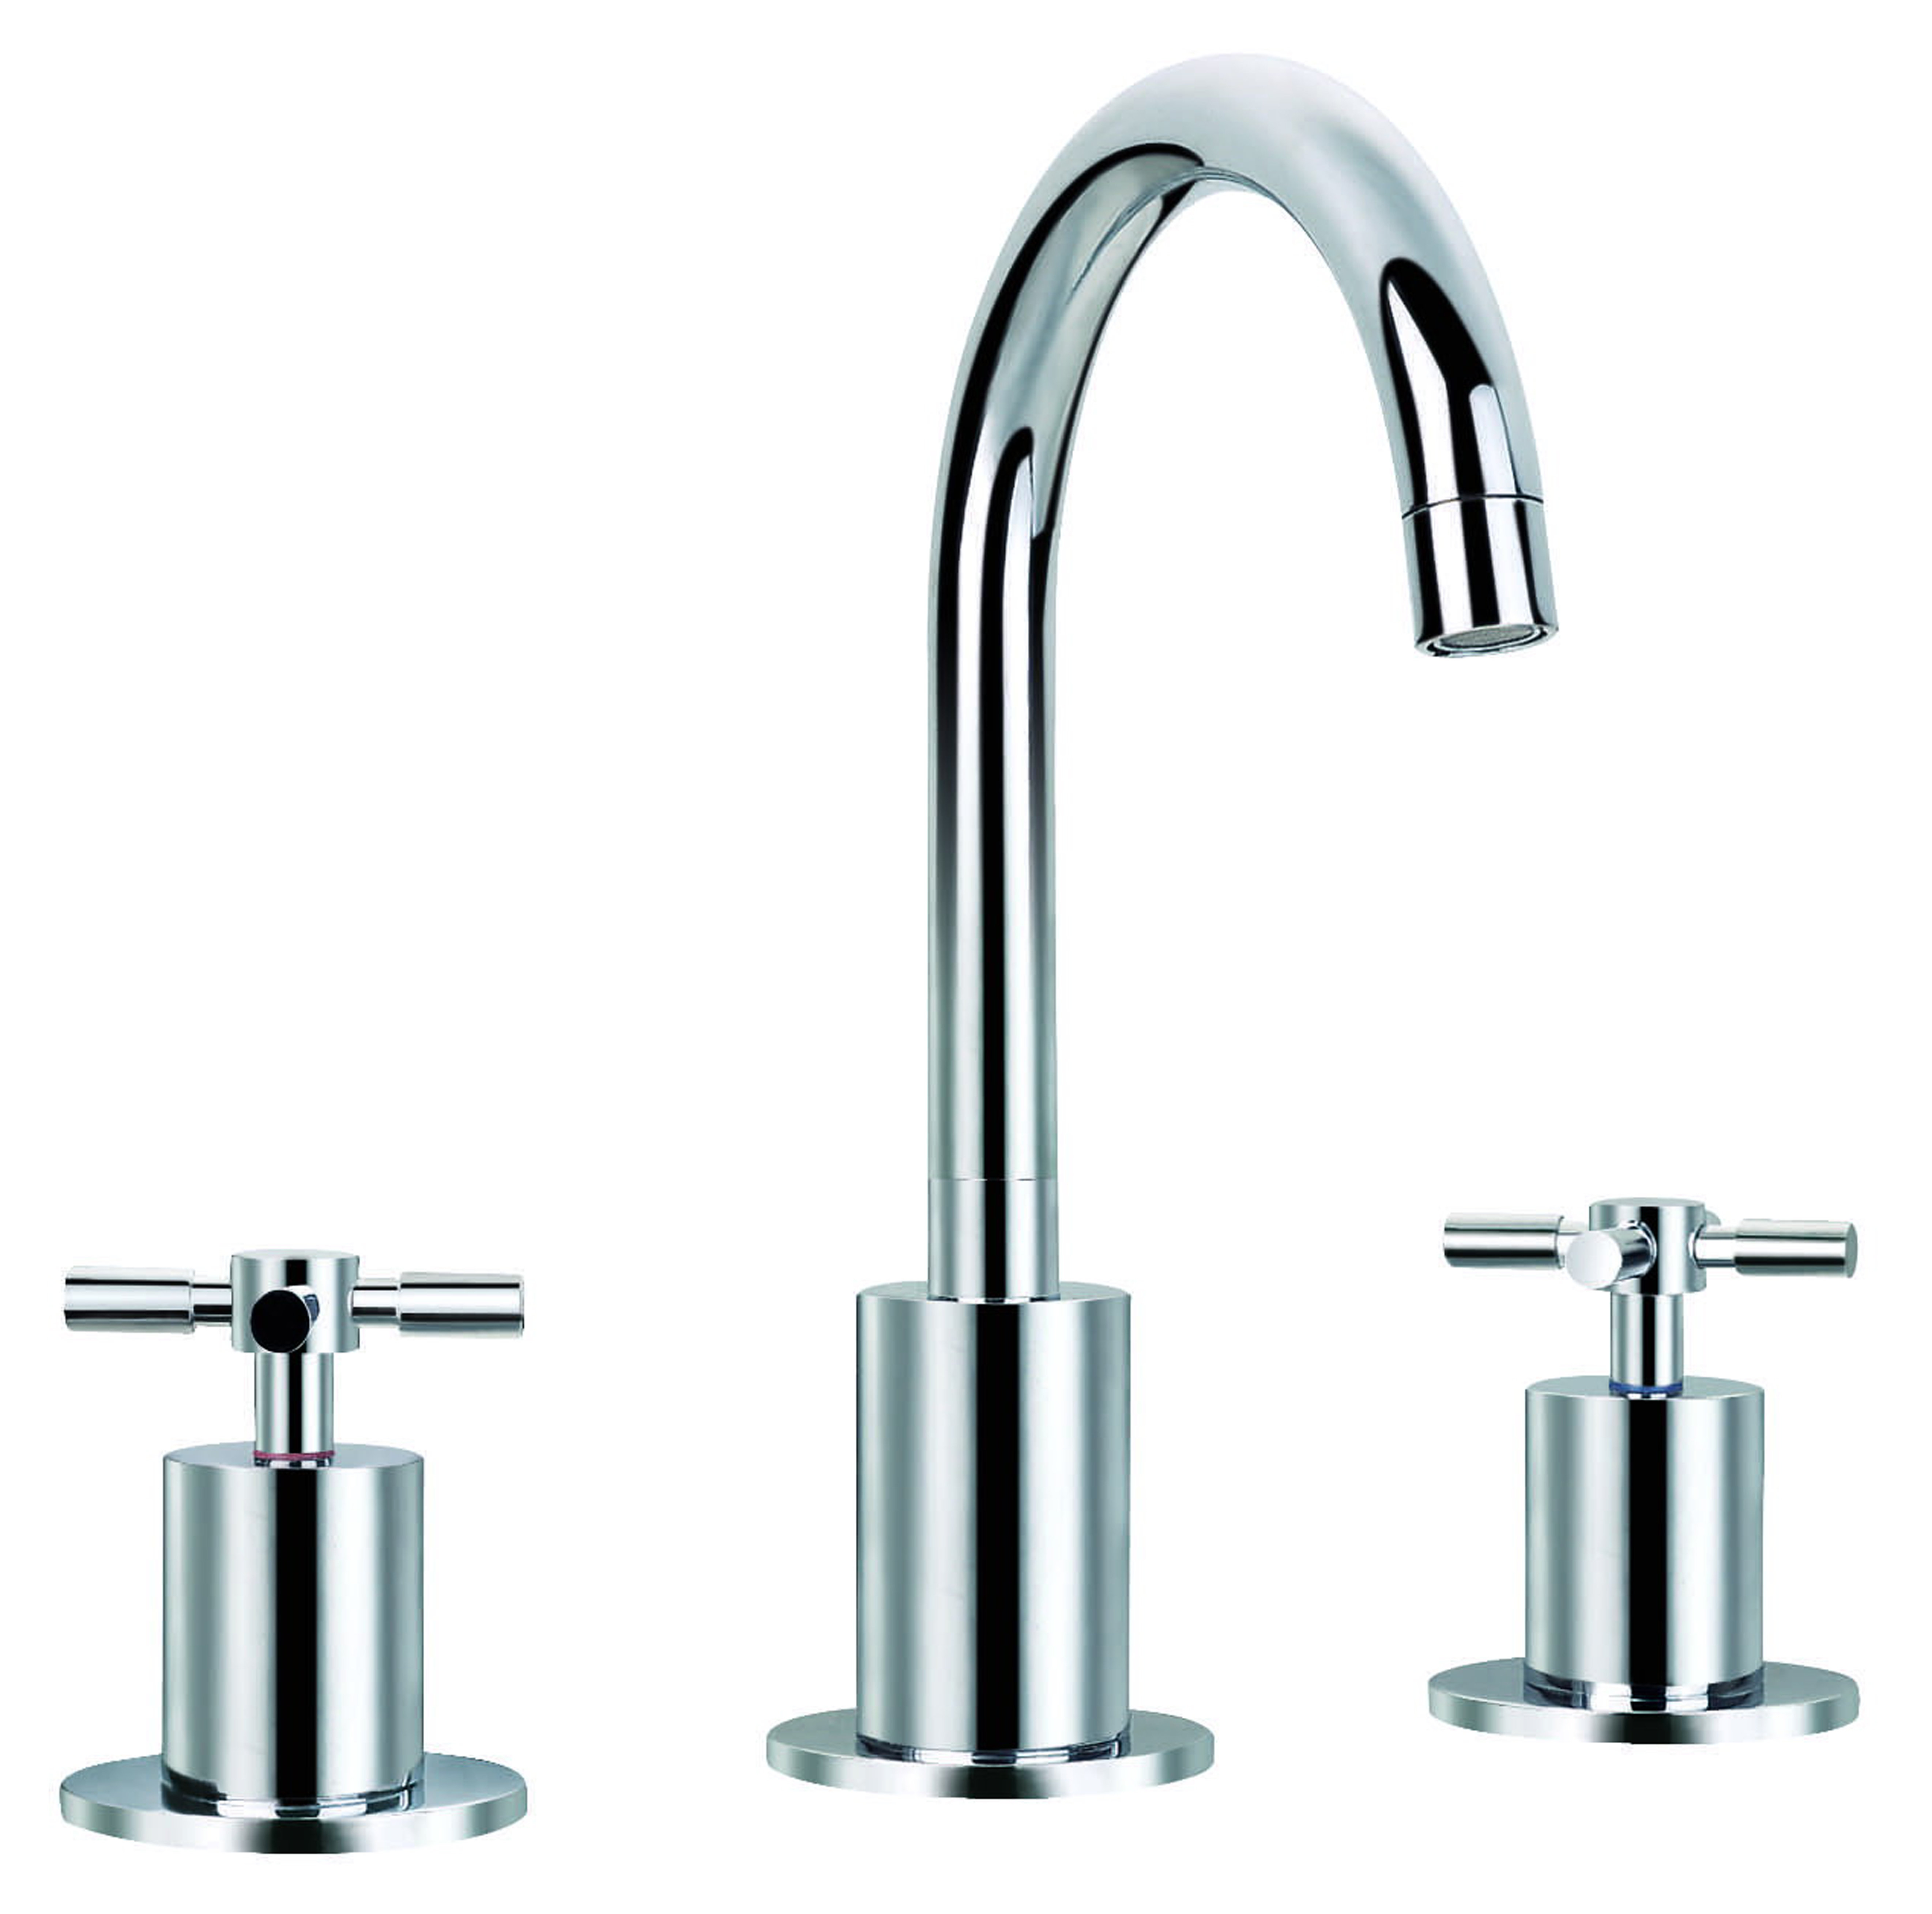 Ancona Prima Widespread Bathroom Faucet Reviews Wayfair intended for dimensions 5283 X 5235